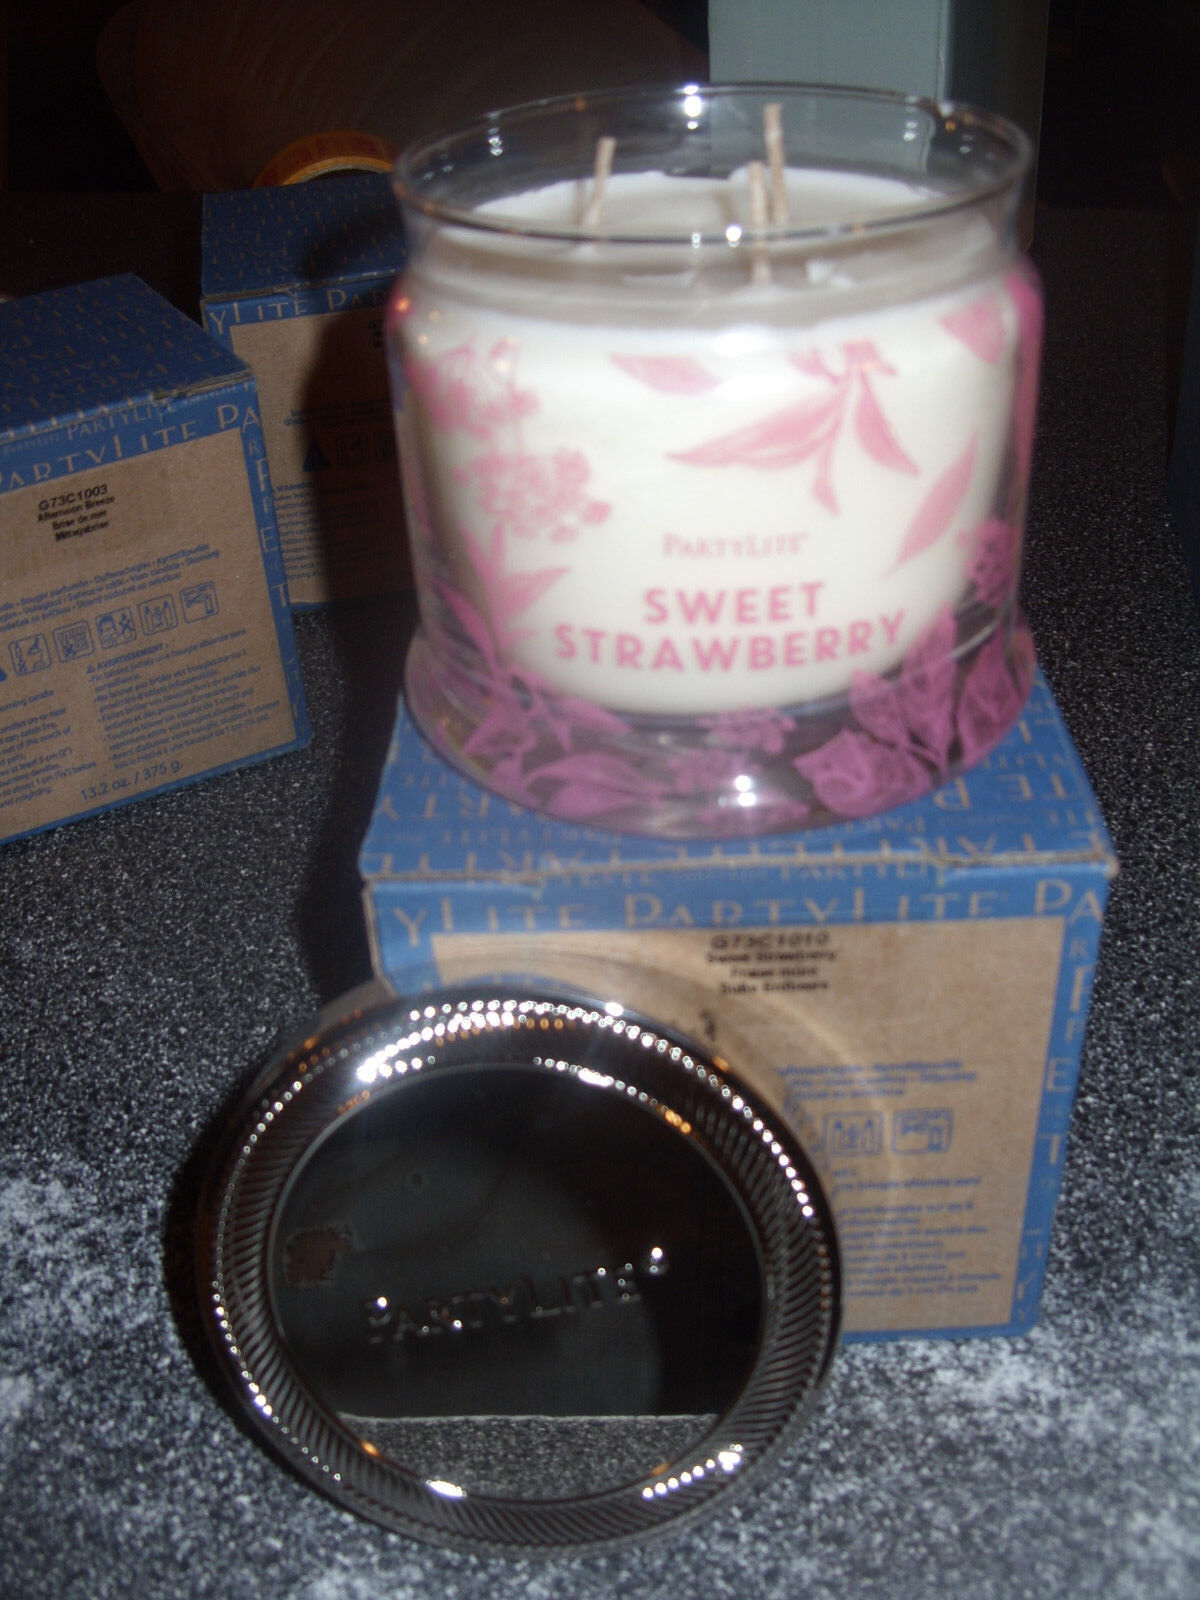 Partylite SWEET STRAWBERRY SIGNATURE 3-wick JAR CANDLE  BRAND NEW FALL 2016 